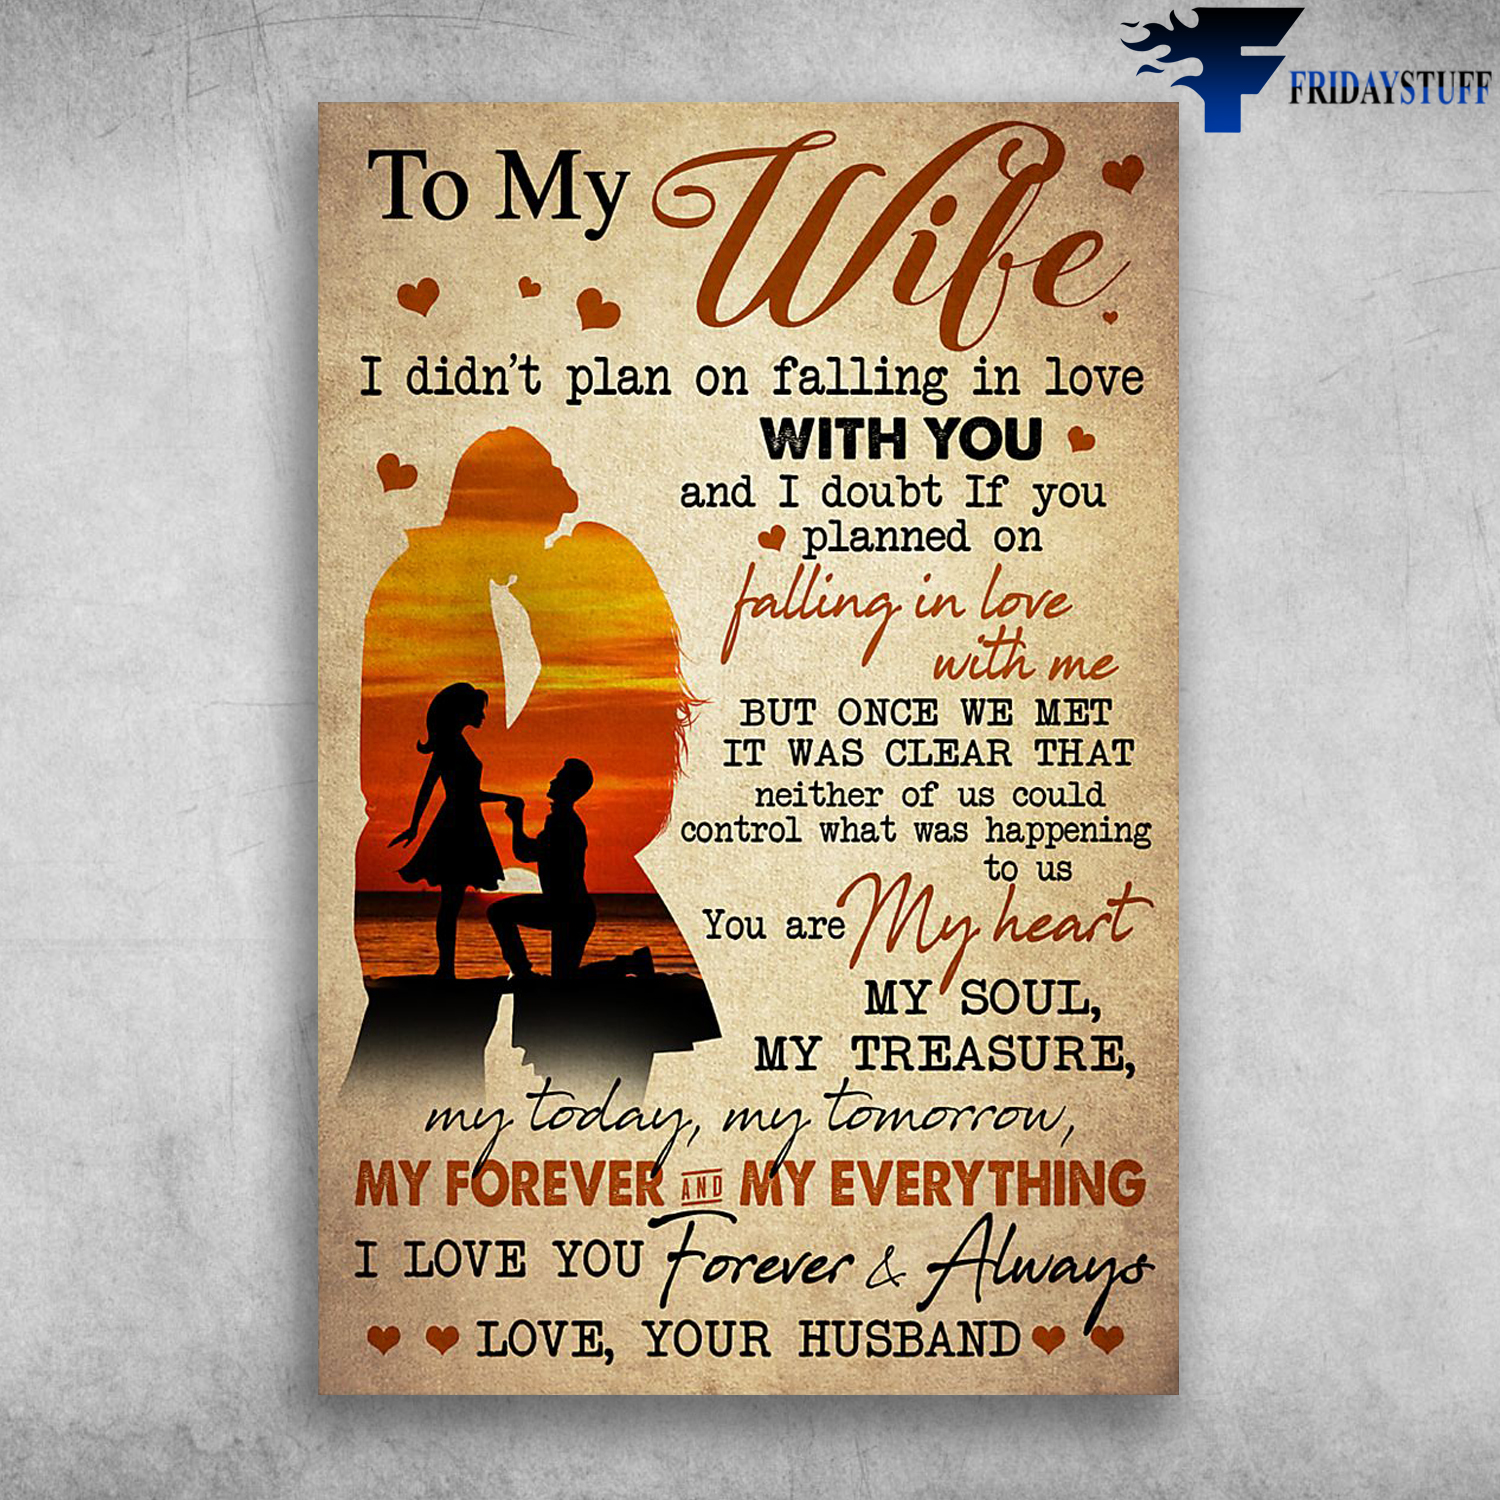 Love Your Wife, your love 